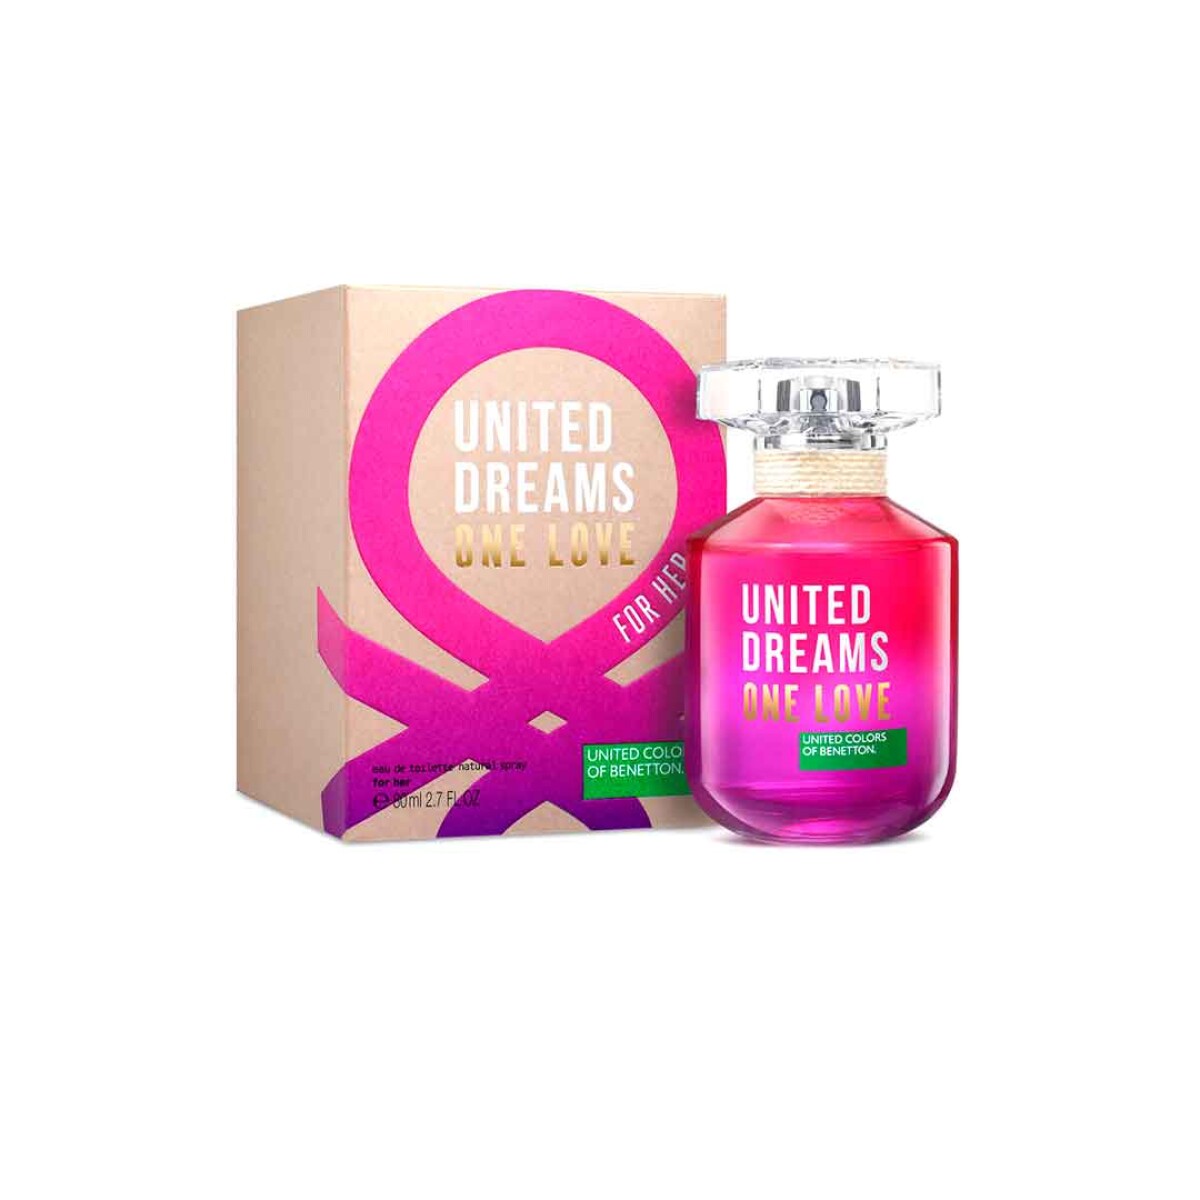 Perfume One LOVE for her Benetton 80ml - 001 